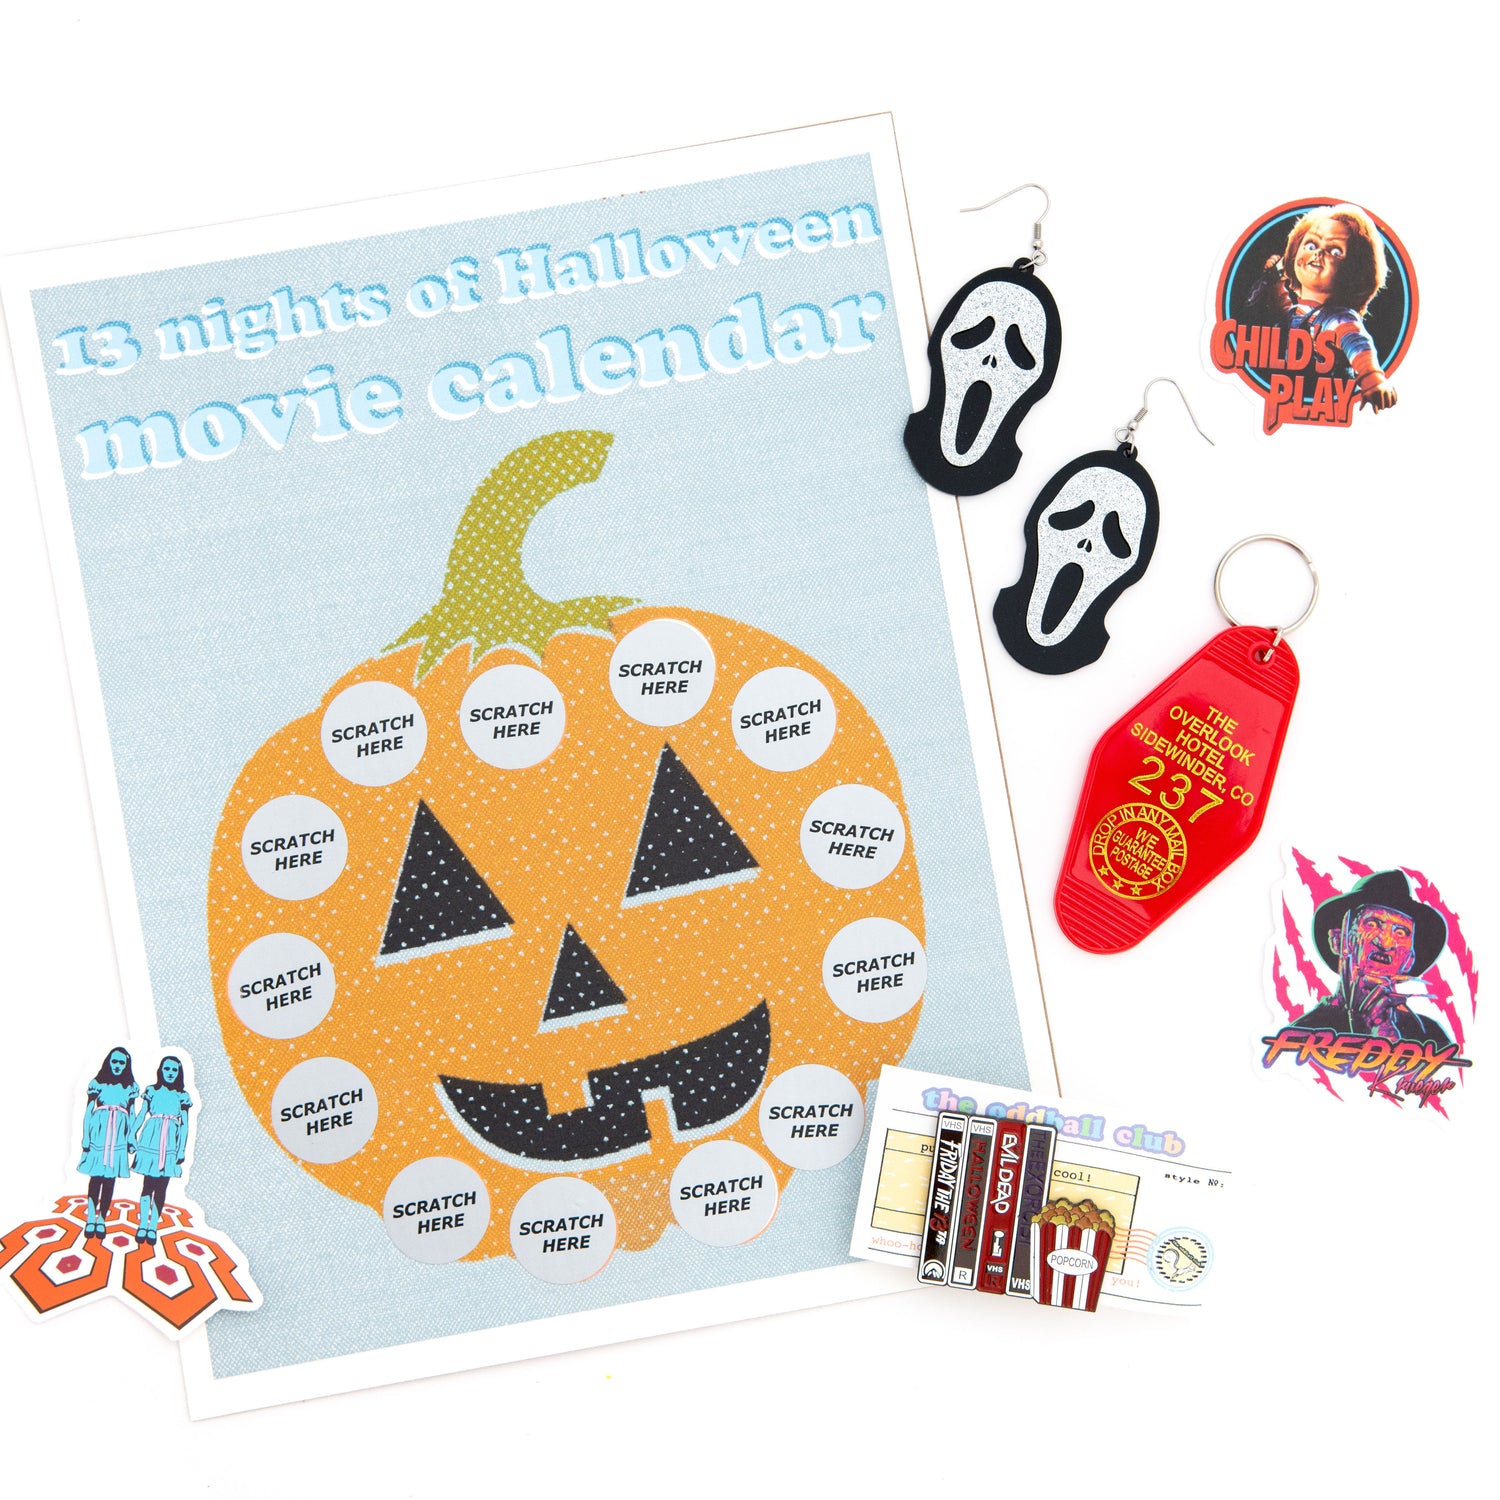 Celebrate Halloween in style with our unique subscription box, including scream earrings, a scratch-off art print, and other ghoulish goodies.